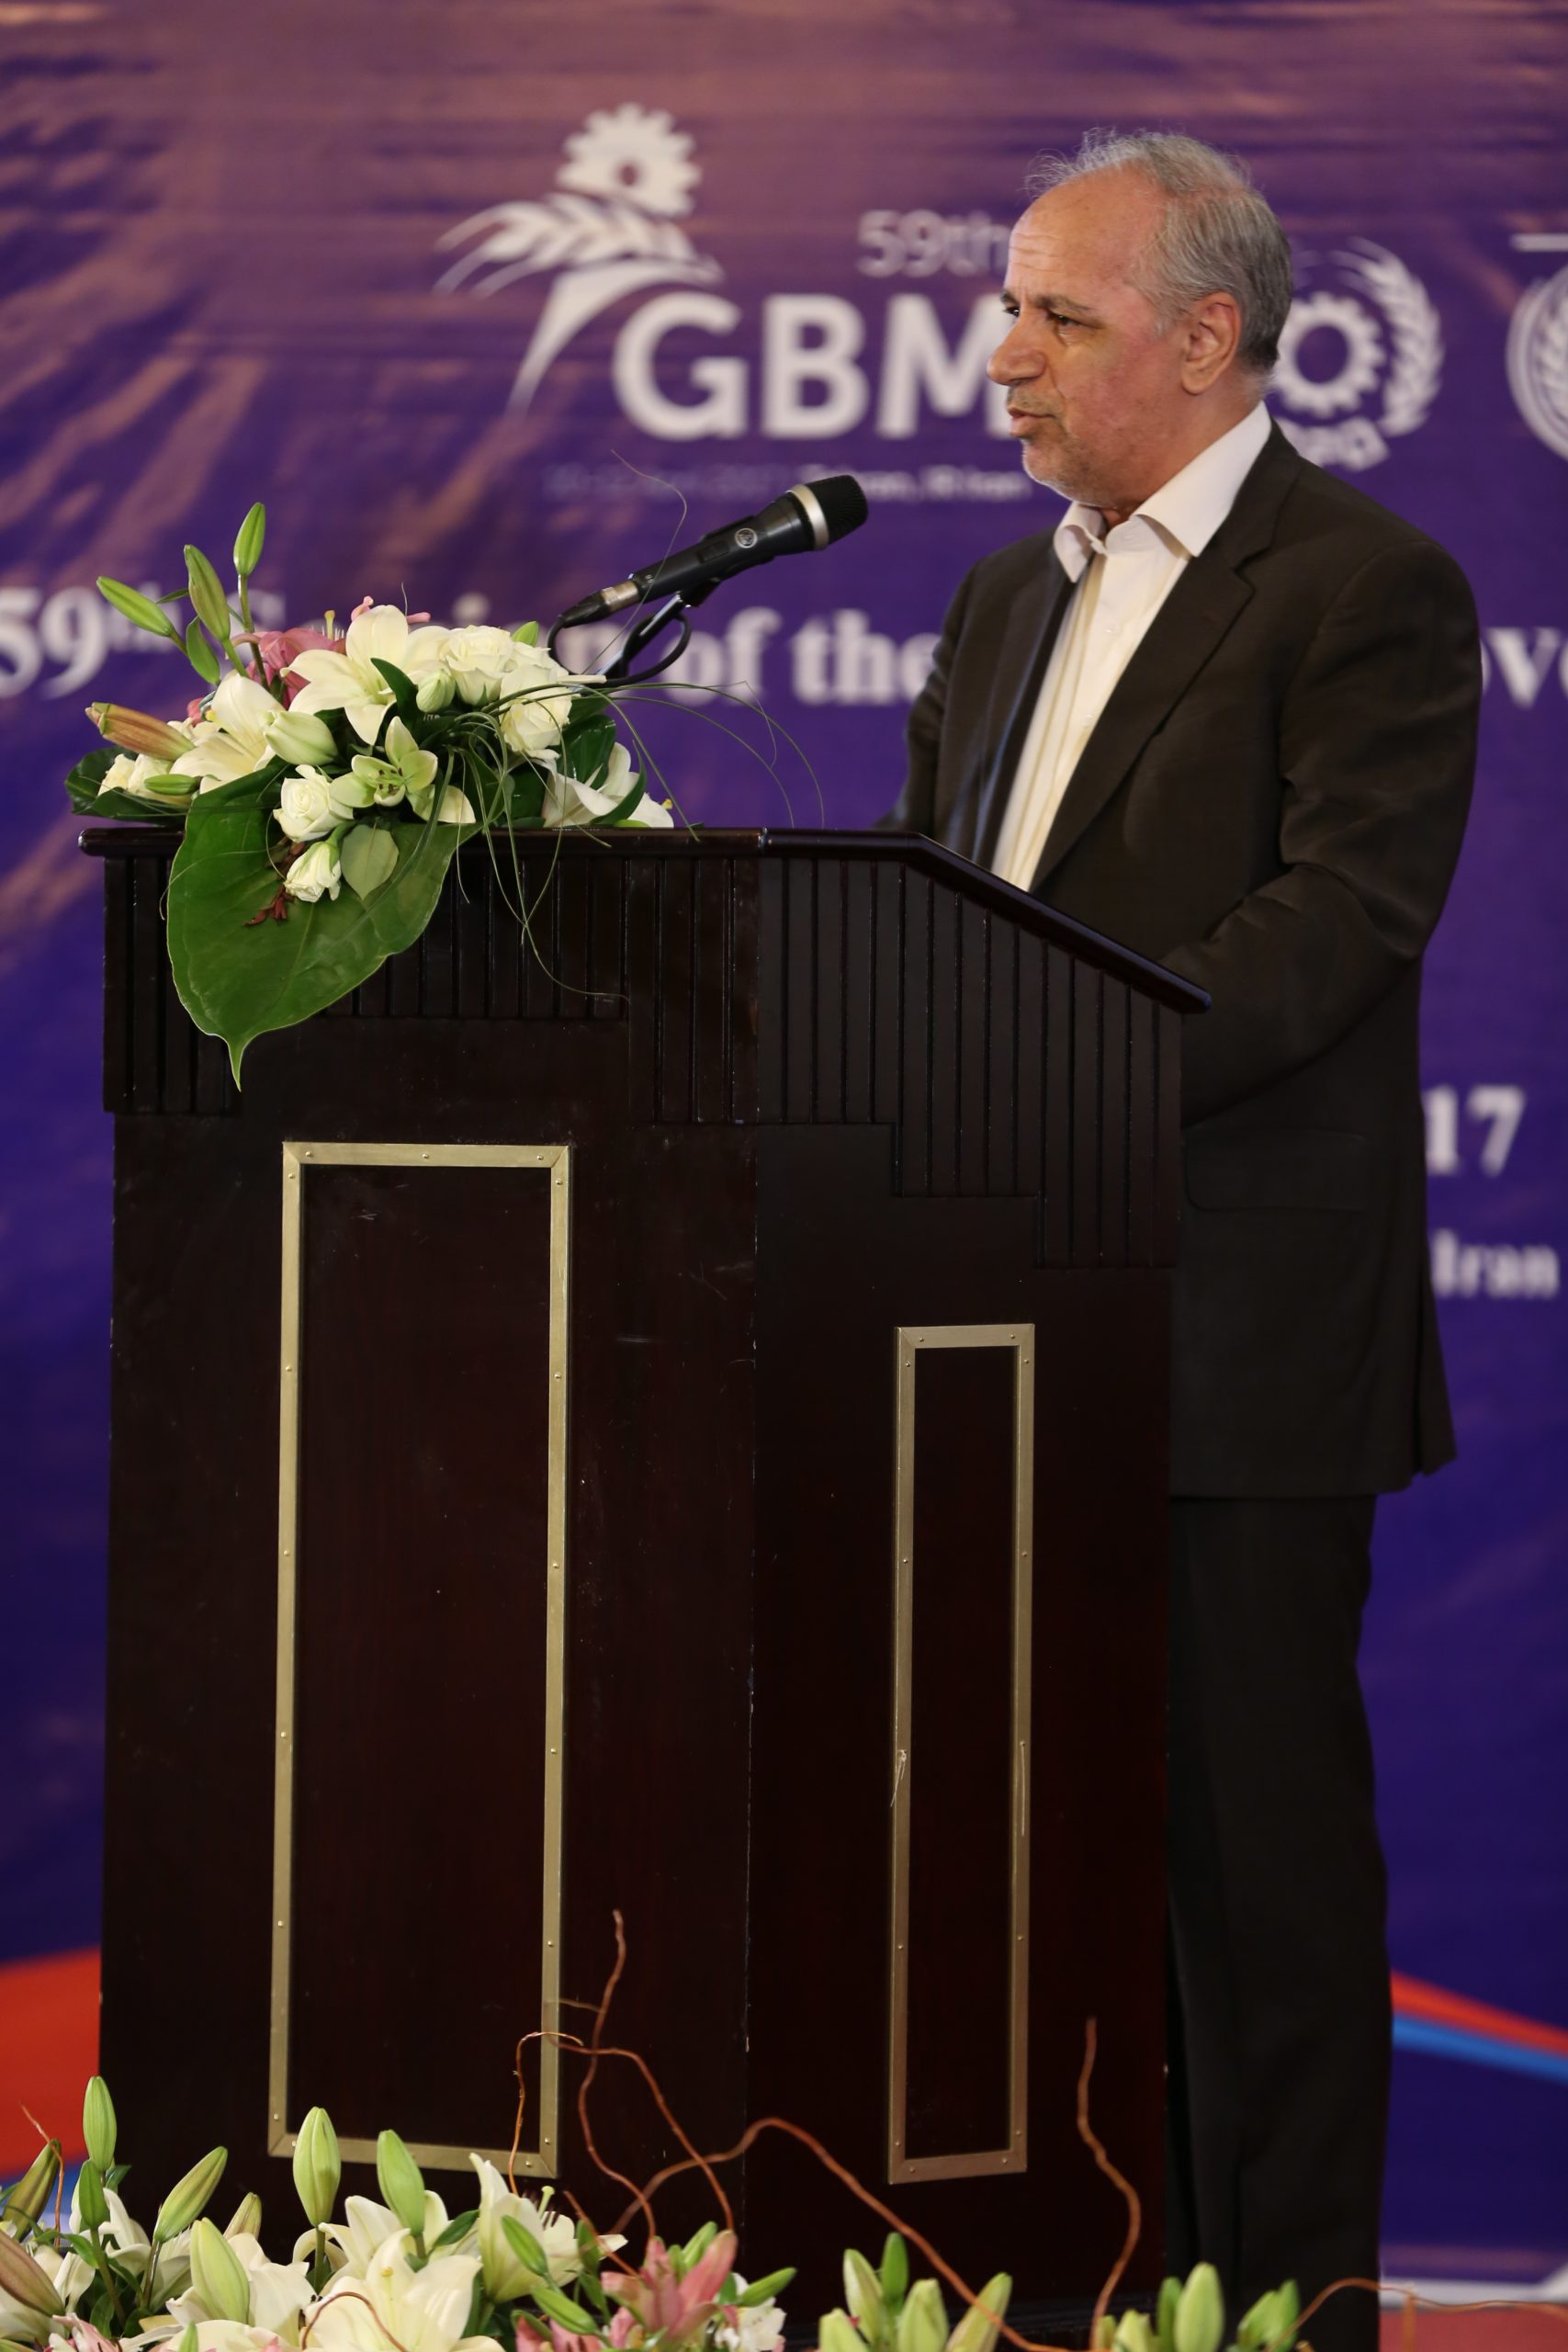 Vice President and Head of the Administrative and Recruitment Organization of IR Iran HE Jamshid Ansari giving the Inaugural Address.